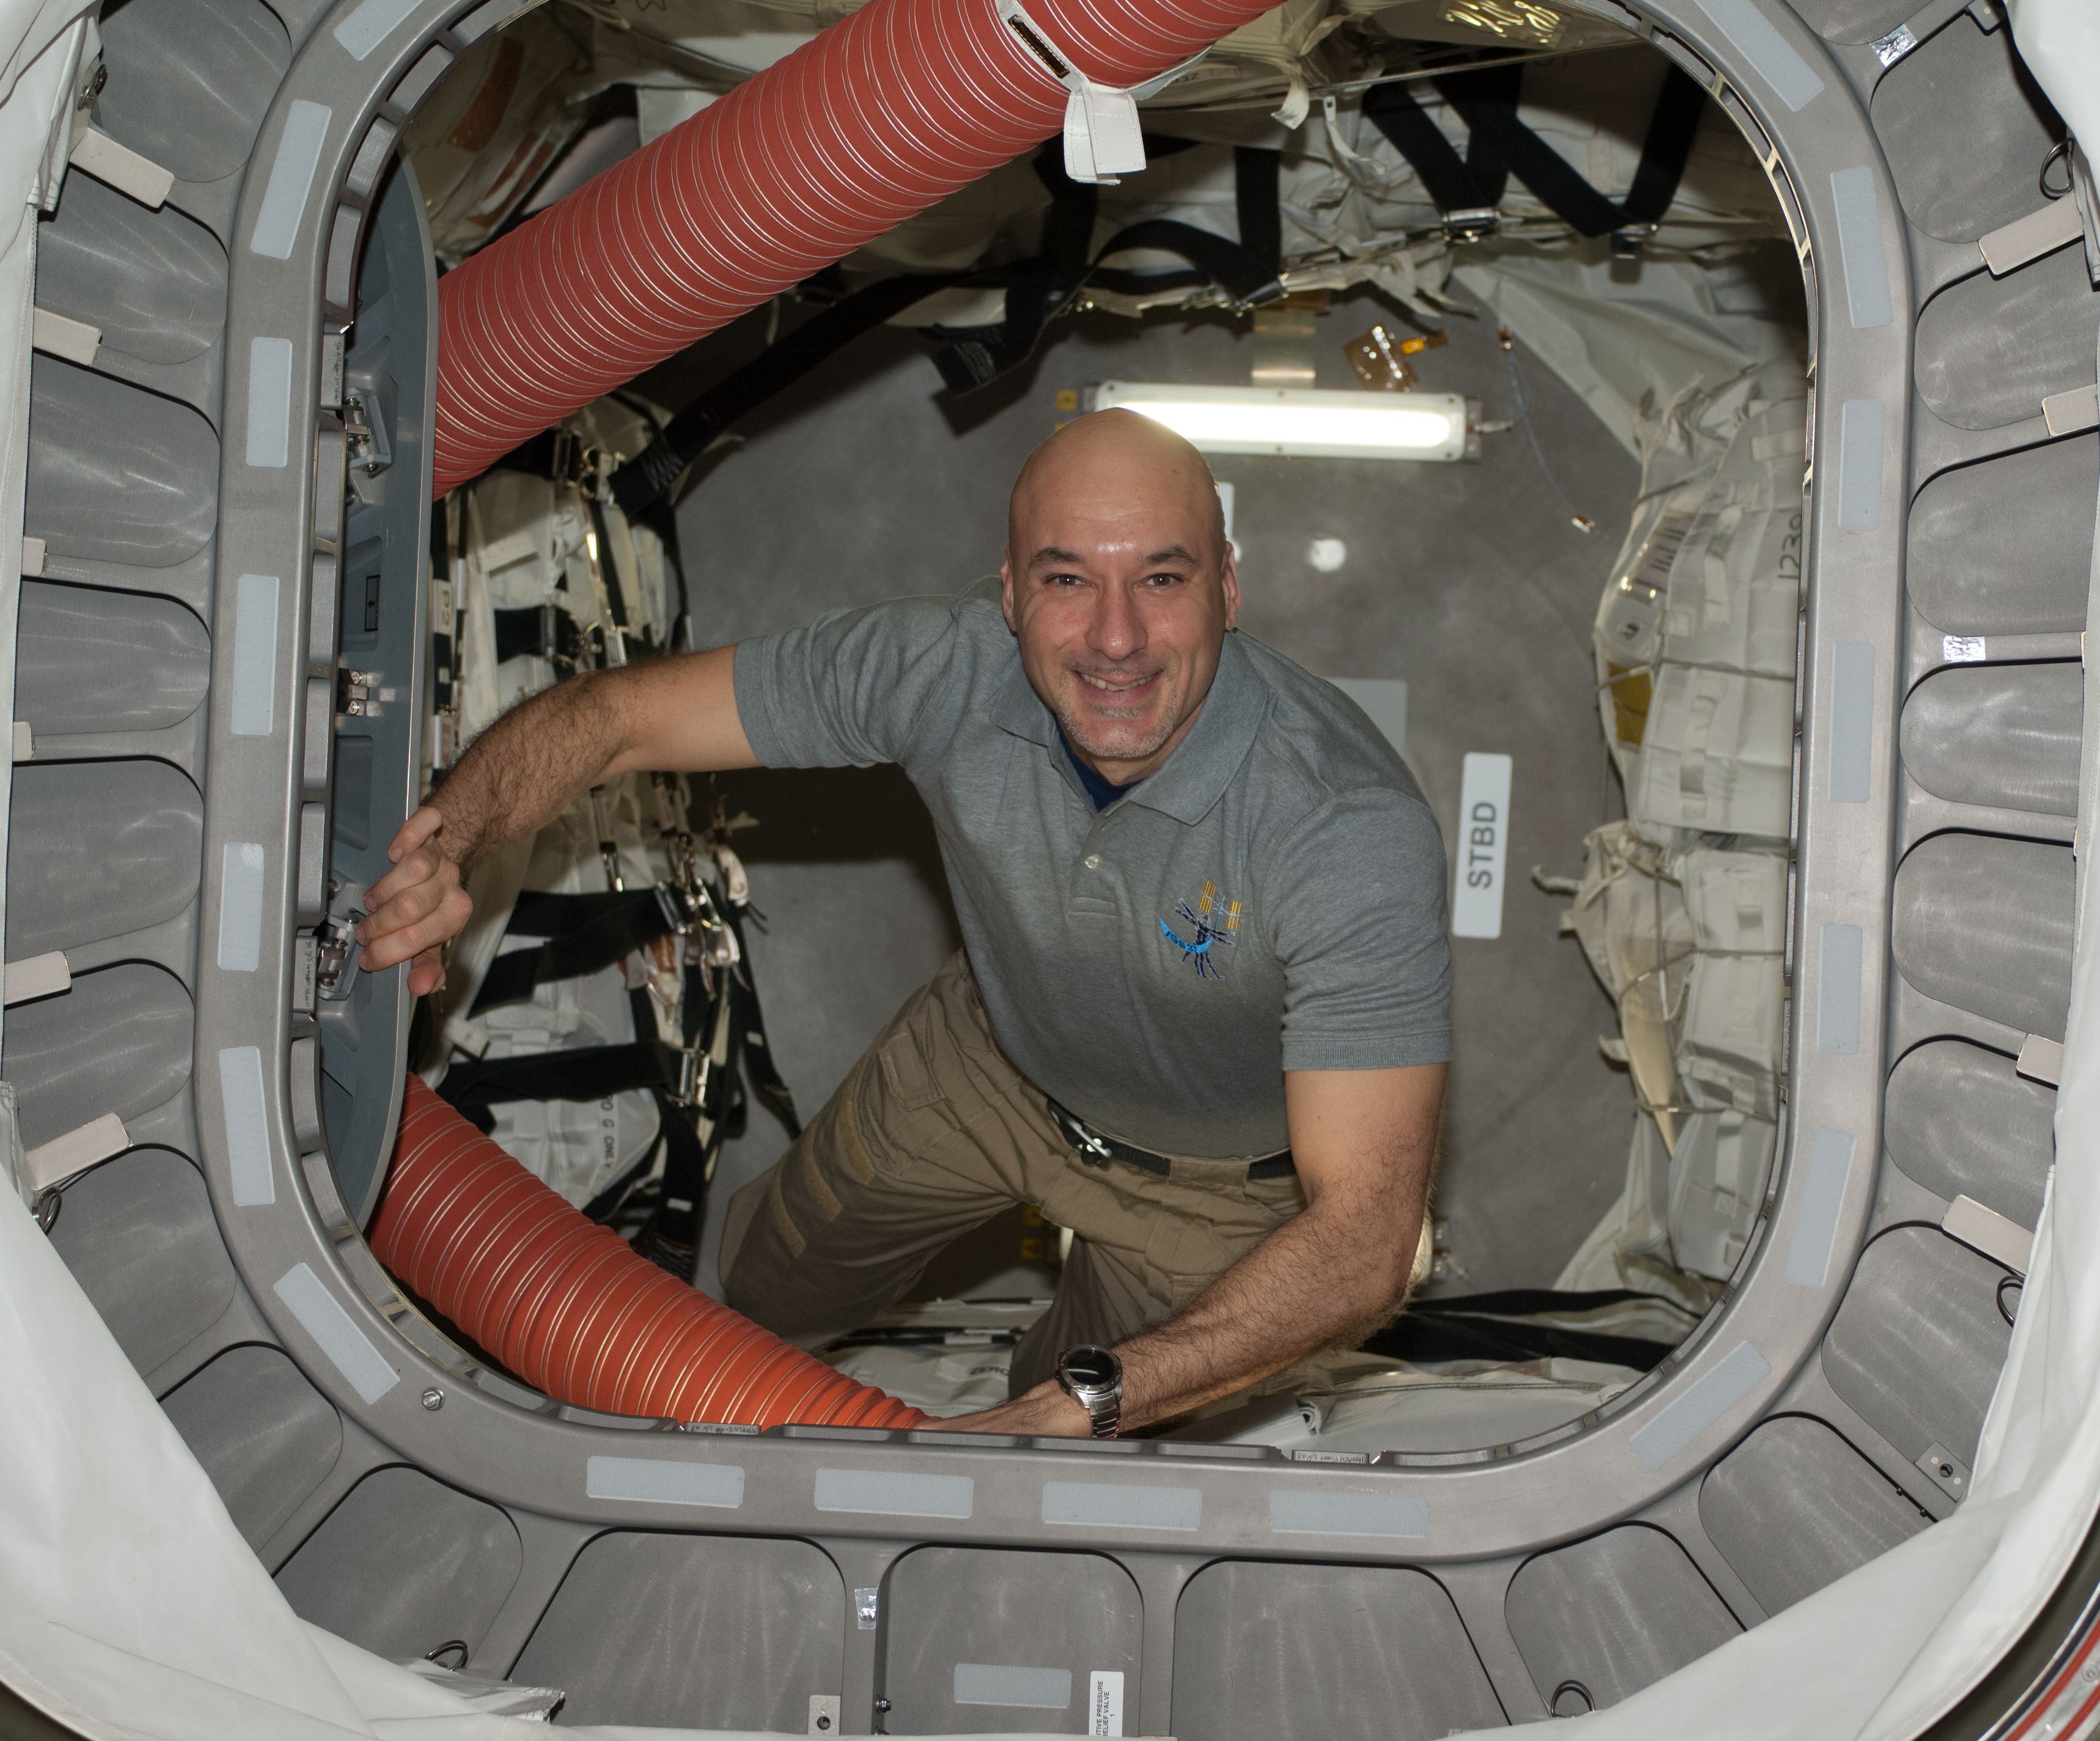 Expedition 37 crew member Luca S. Parmitano of the European Space Agency inside the Cygnus spacecraft during its Demo mission to the space station